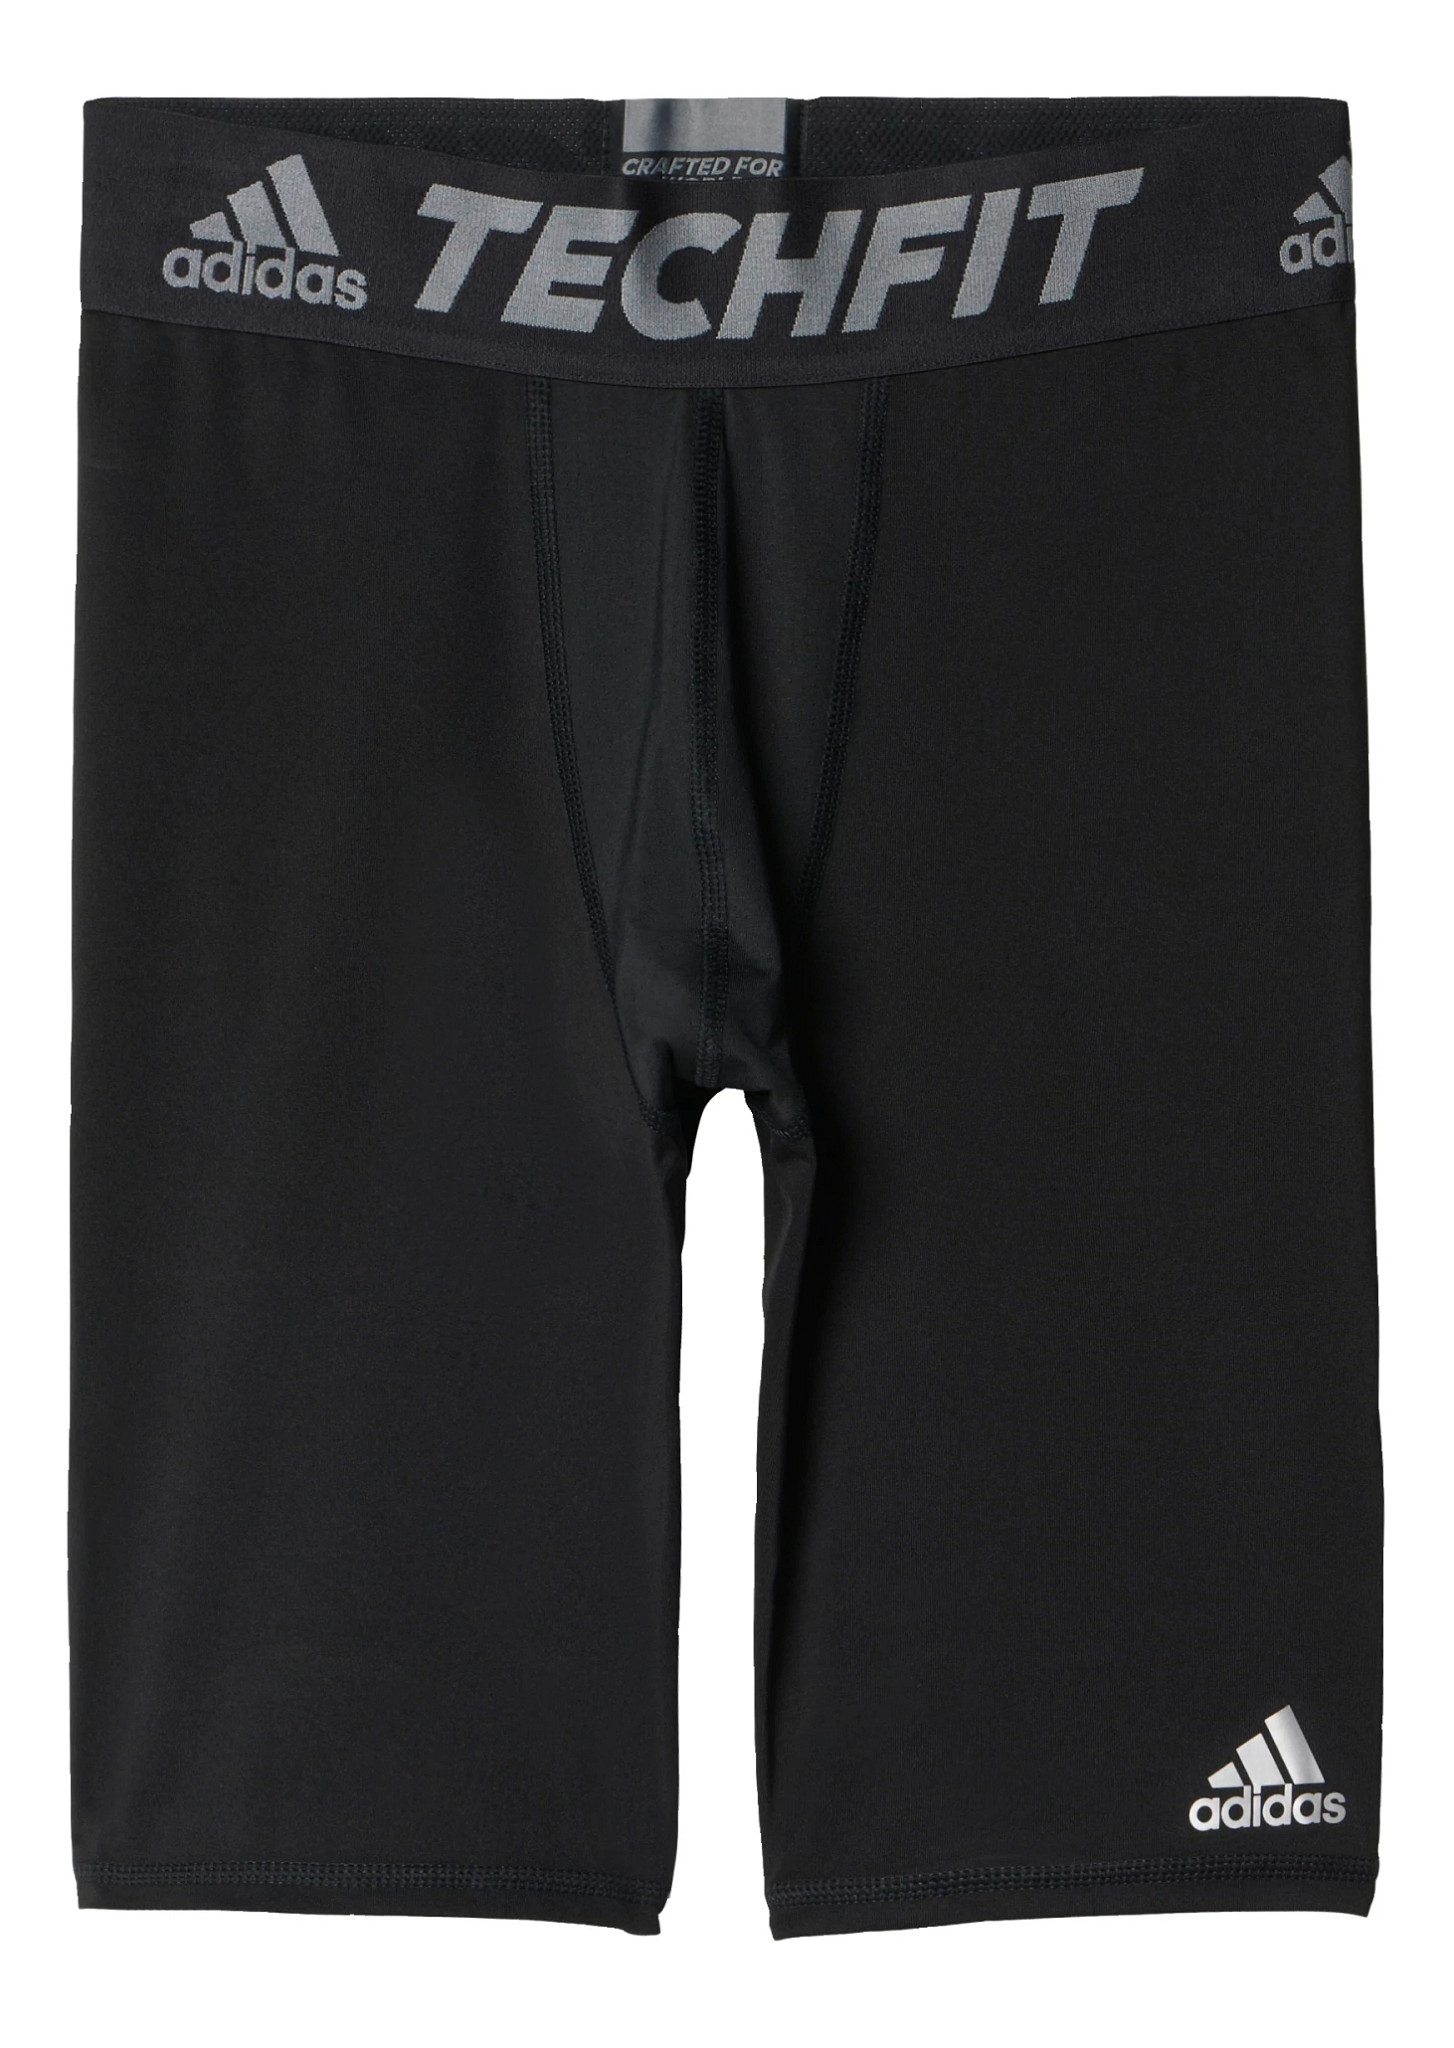 Mens adidas Techfit Short Tight Base-Layer Compression & Fitted Shorts